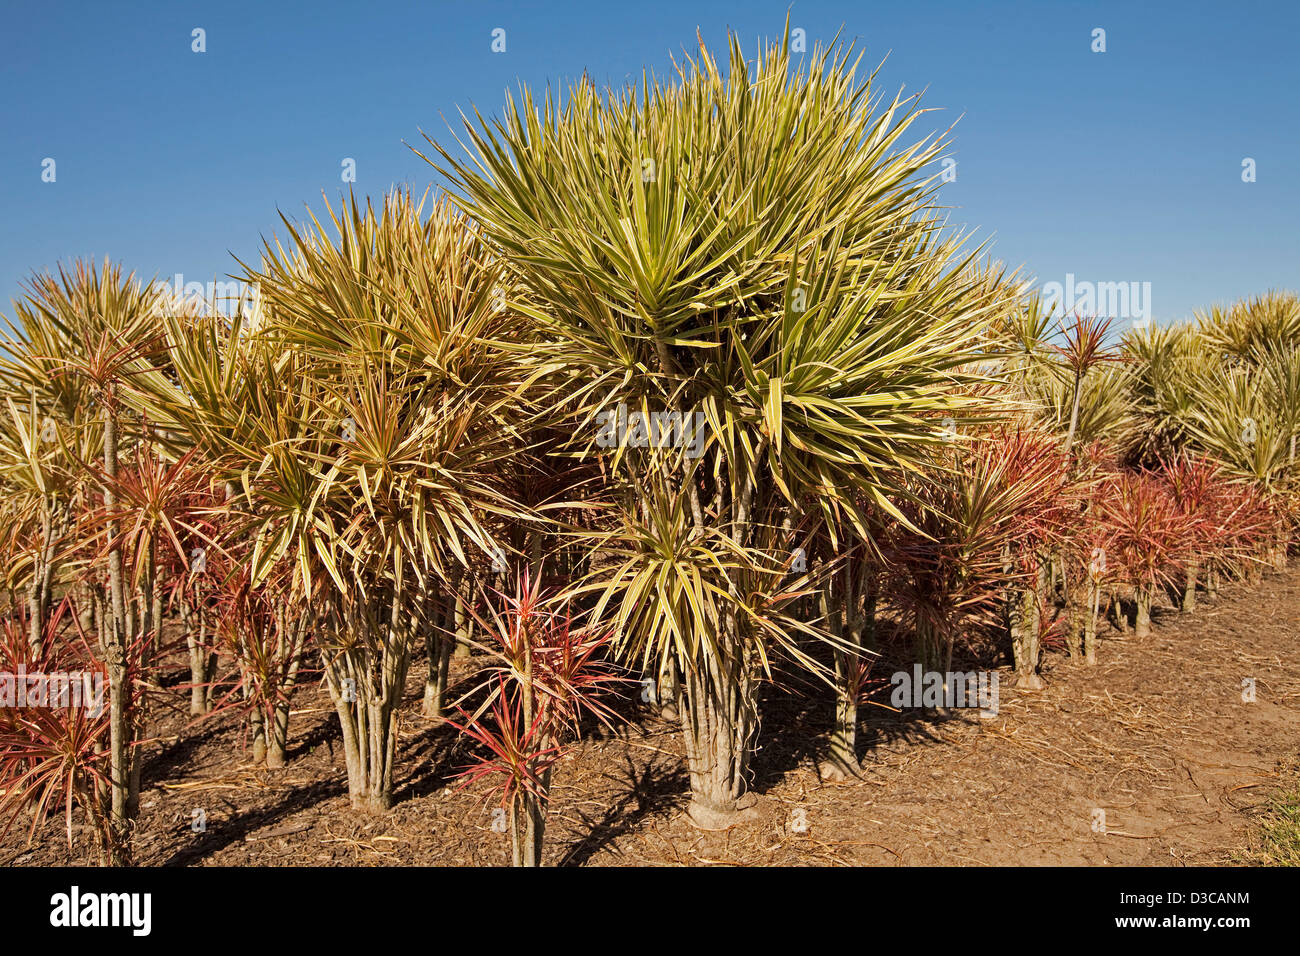 Rows of tall plants - Cordylines with bright red and variegated foliage - growing outdoors at a specialist plant nursery Stock Photo